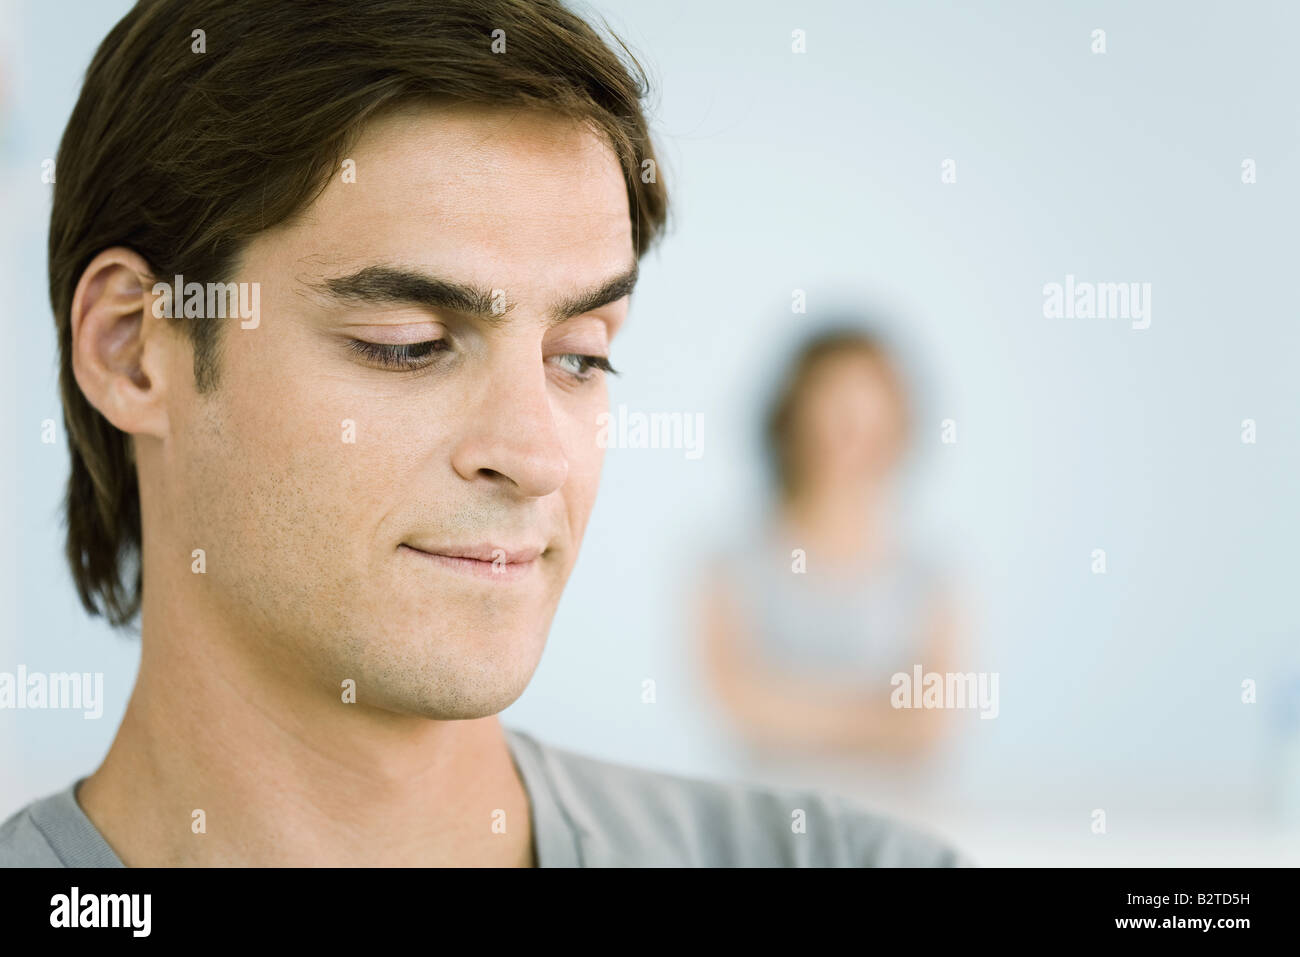 Man making sideways glance over shoulder, woman with arms folded in background Stock Photo